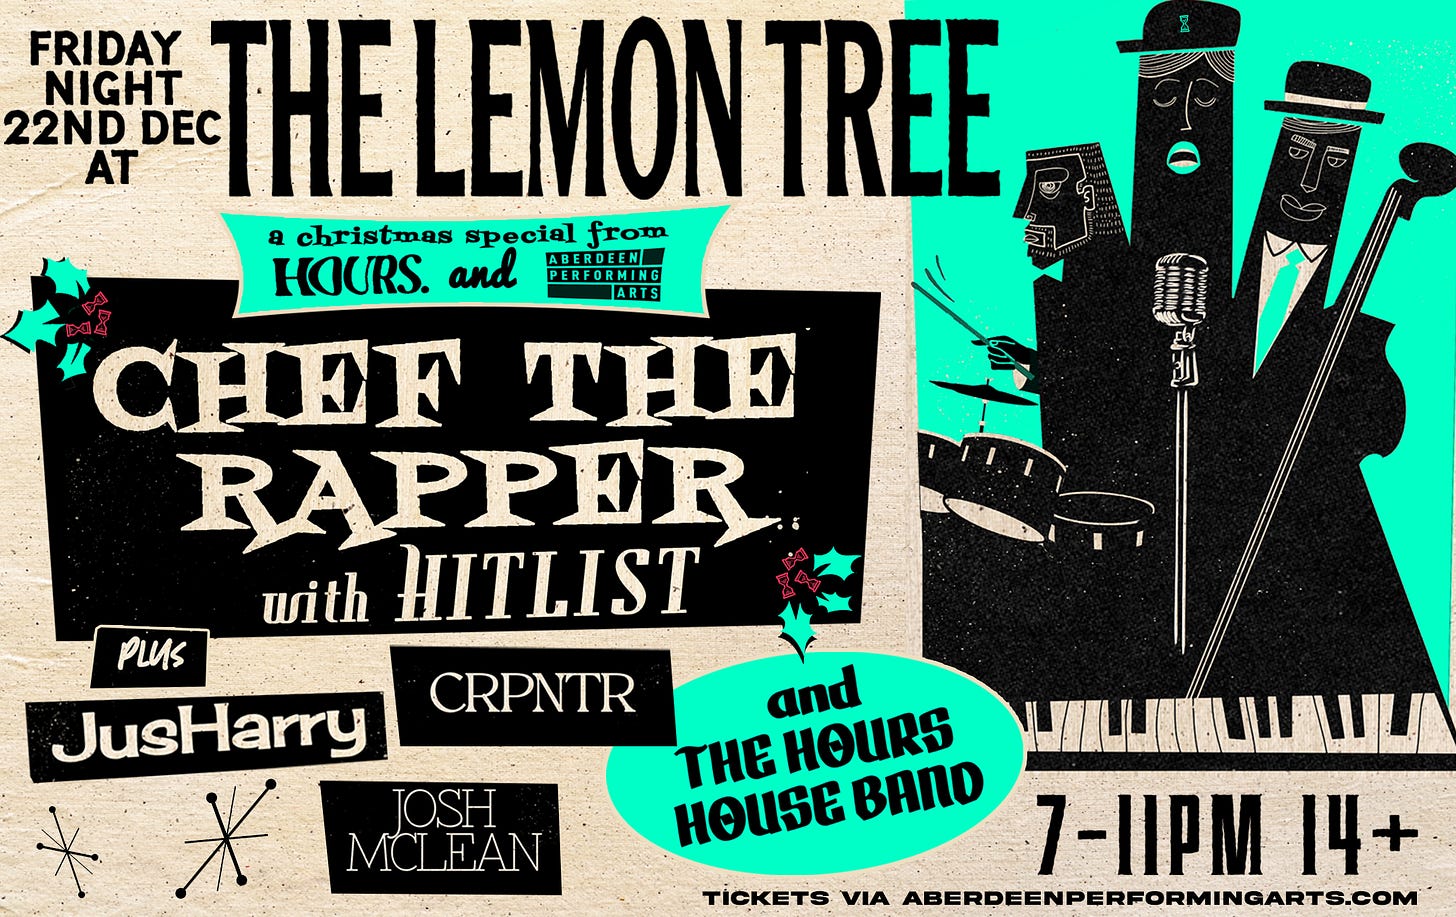 The poster is a vibrant and eye-catching advertisement for a music event at The Lemon Tree on Friday night, 22nd December. It features bold, stylized text announcing "CHEF THE RAPPER with HITLIST" as the main act, plus supporting acts "JusHarry", "CRPNTR", and "Josh McLean". Also mentioned are "THE HOURS HOUSE BAND". The graphic has a retro feel, with stylized illustrations of musicians in black against a bright teal background. The event information at the bottom notes "7-11PM 14+" and "TICKETS VIA ABERDEENPERFORMINGARTS.COM". The overall design has a playful and musical theme, with Christmas decorations like holly adding a festive touch.